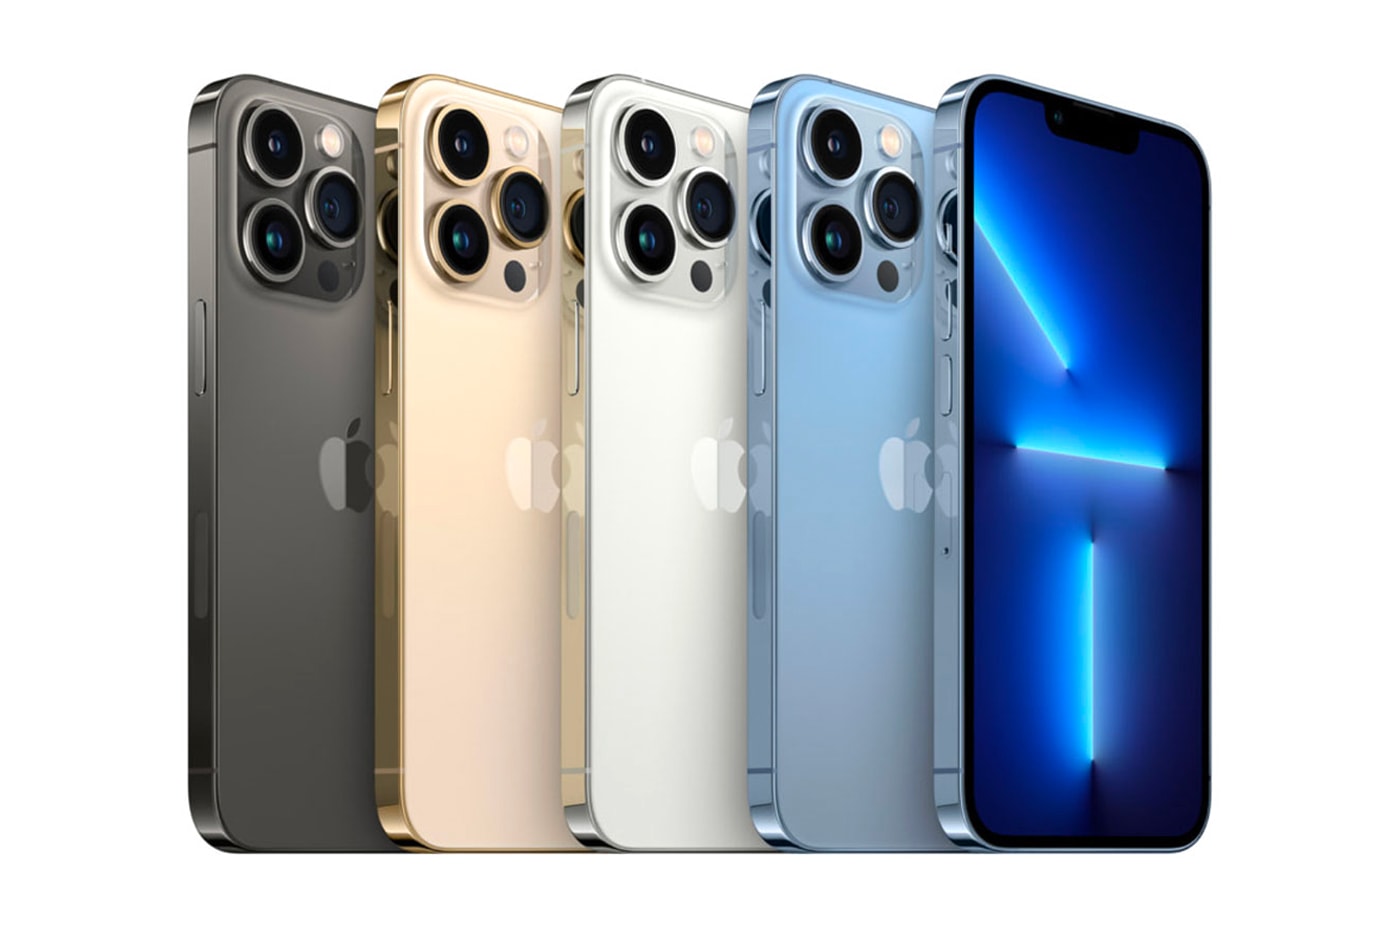 Apple Announces iPhone 13 With Redesigned Cameras and 50% Faster Processor Mini iPhone 13 Pro Max